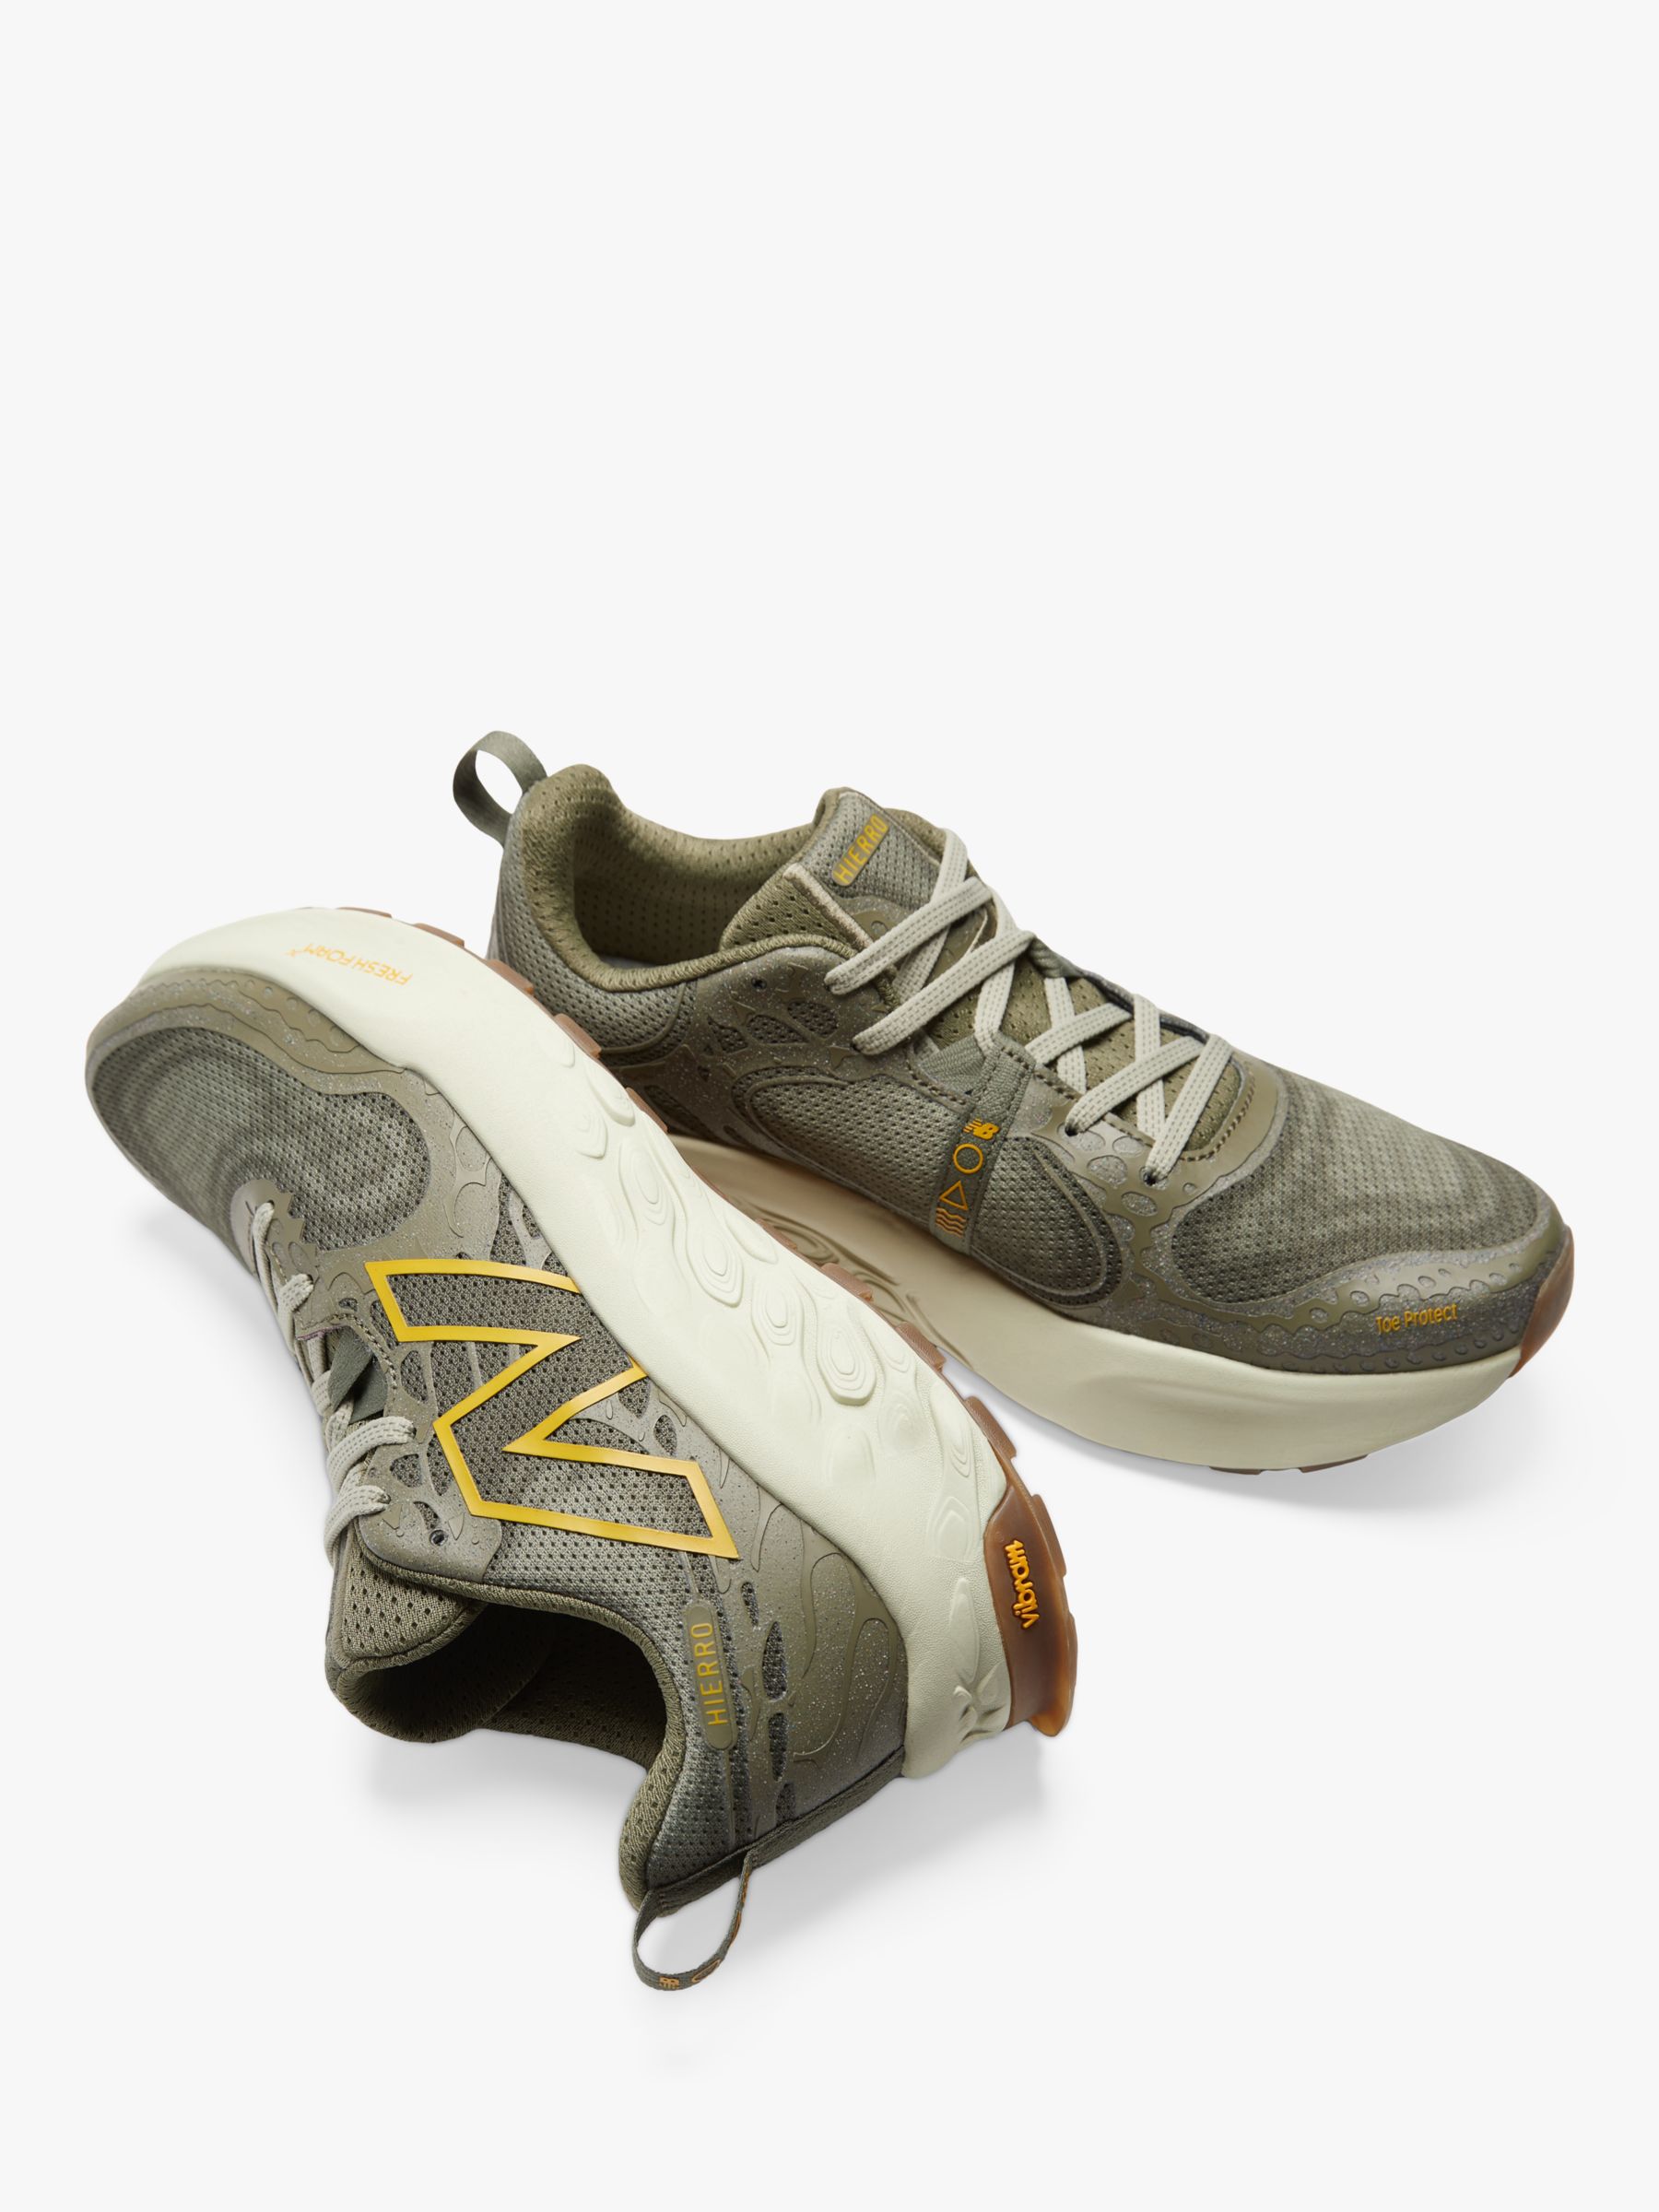 Buy New Balance Men's Hierro V8 Trainers Online at johnlewis.com